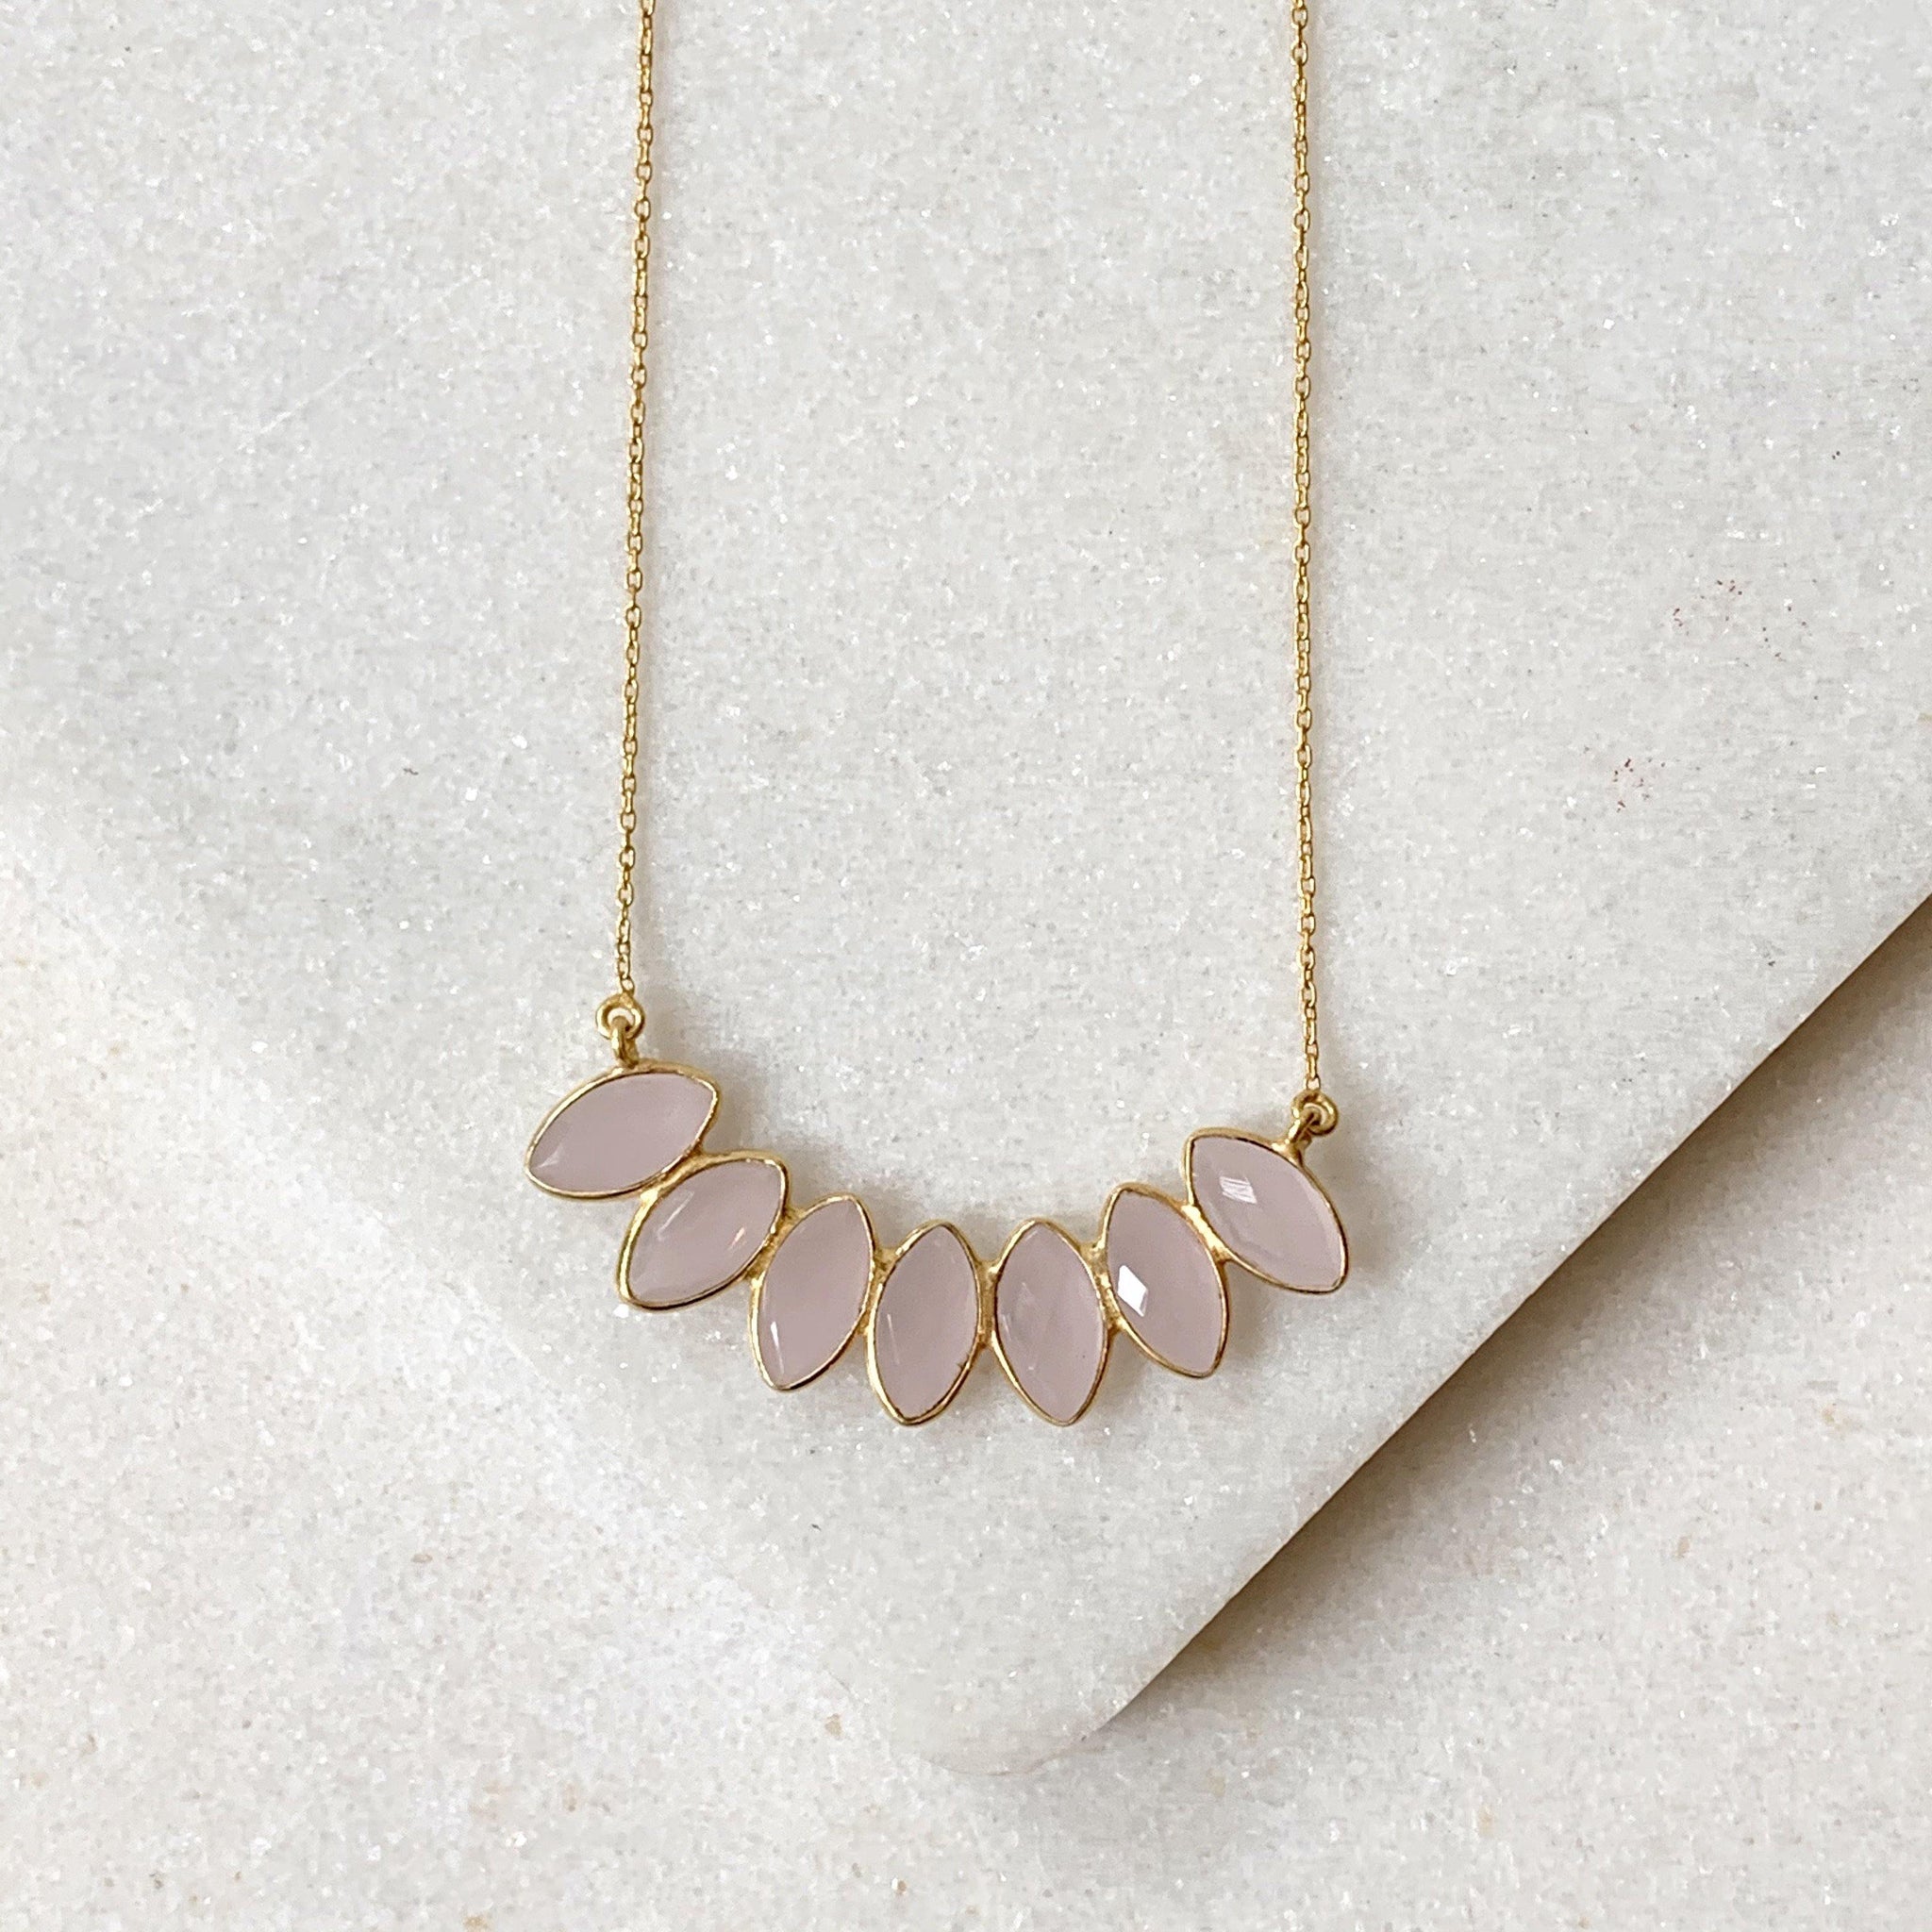 Marquee Shaped Stone Necklace - Revival Phl